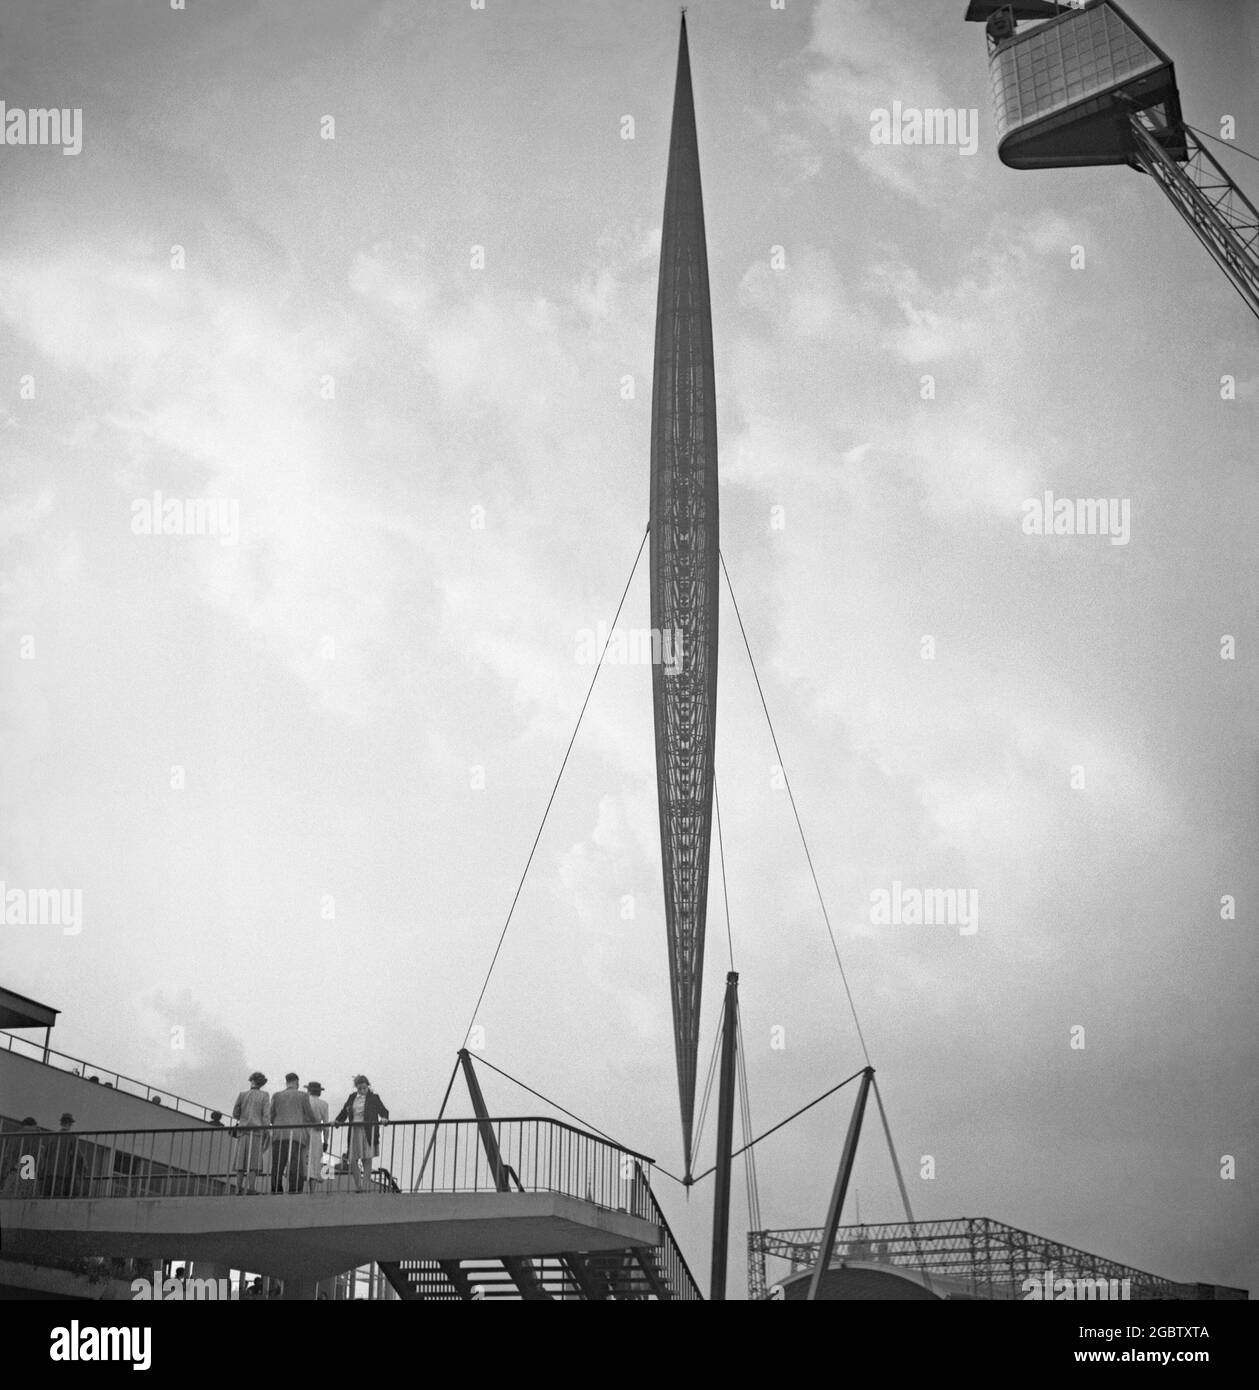 A view of the Skylon at the Festival of Britain’s South Bank Exhibition, London, England, UK in 1951. The Skylon was a futuristic, slender steel structure. It gave the illusion of 'floating' above the ground and became a symbol of the festival. It was designed by Hidalgo Moya, Philip Powell and Felix Samuely and was fabricated by Painter Brothers of Hereford, England. The Skylon consisted of a steel latticework frame and supported by cables and steel beams. The frame was clad in aluminium louvres lit from within at night. The Skylon was removed in 1952 when the site was cleared. Stock Photo